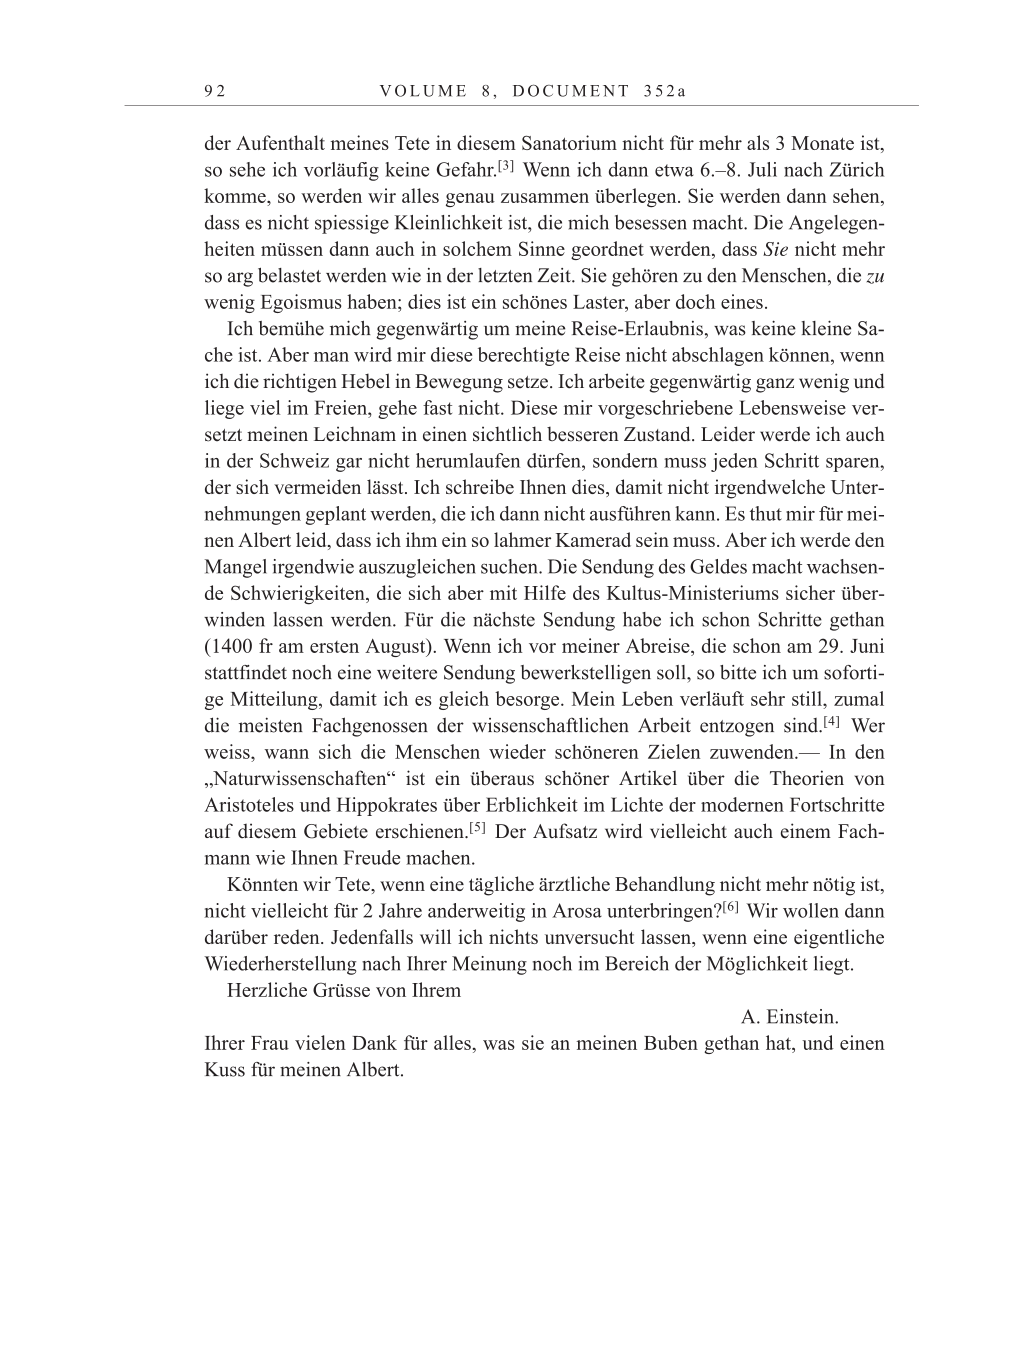 Volume 10: The Berlin Years: Correspondence May-December 1920 / Supplementary Correspondence 1909-1920 page 92